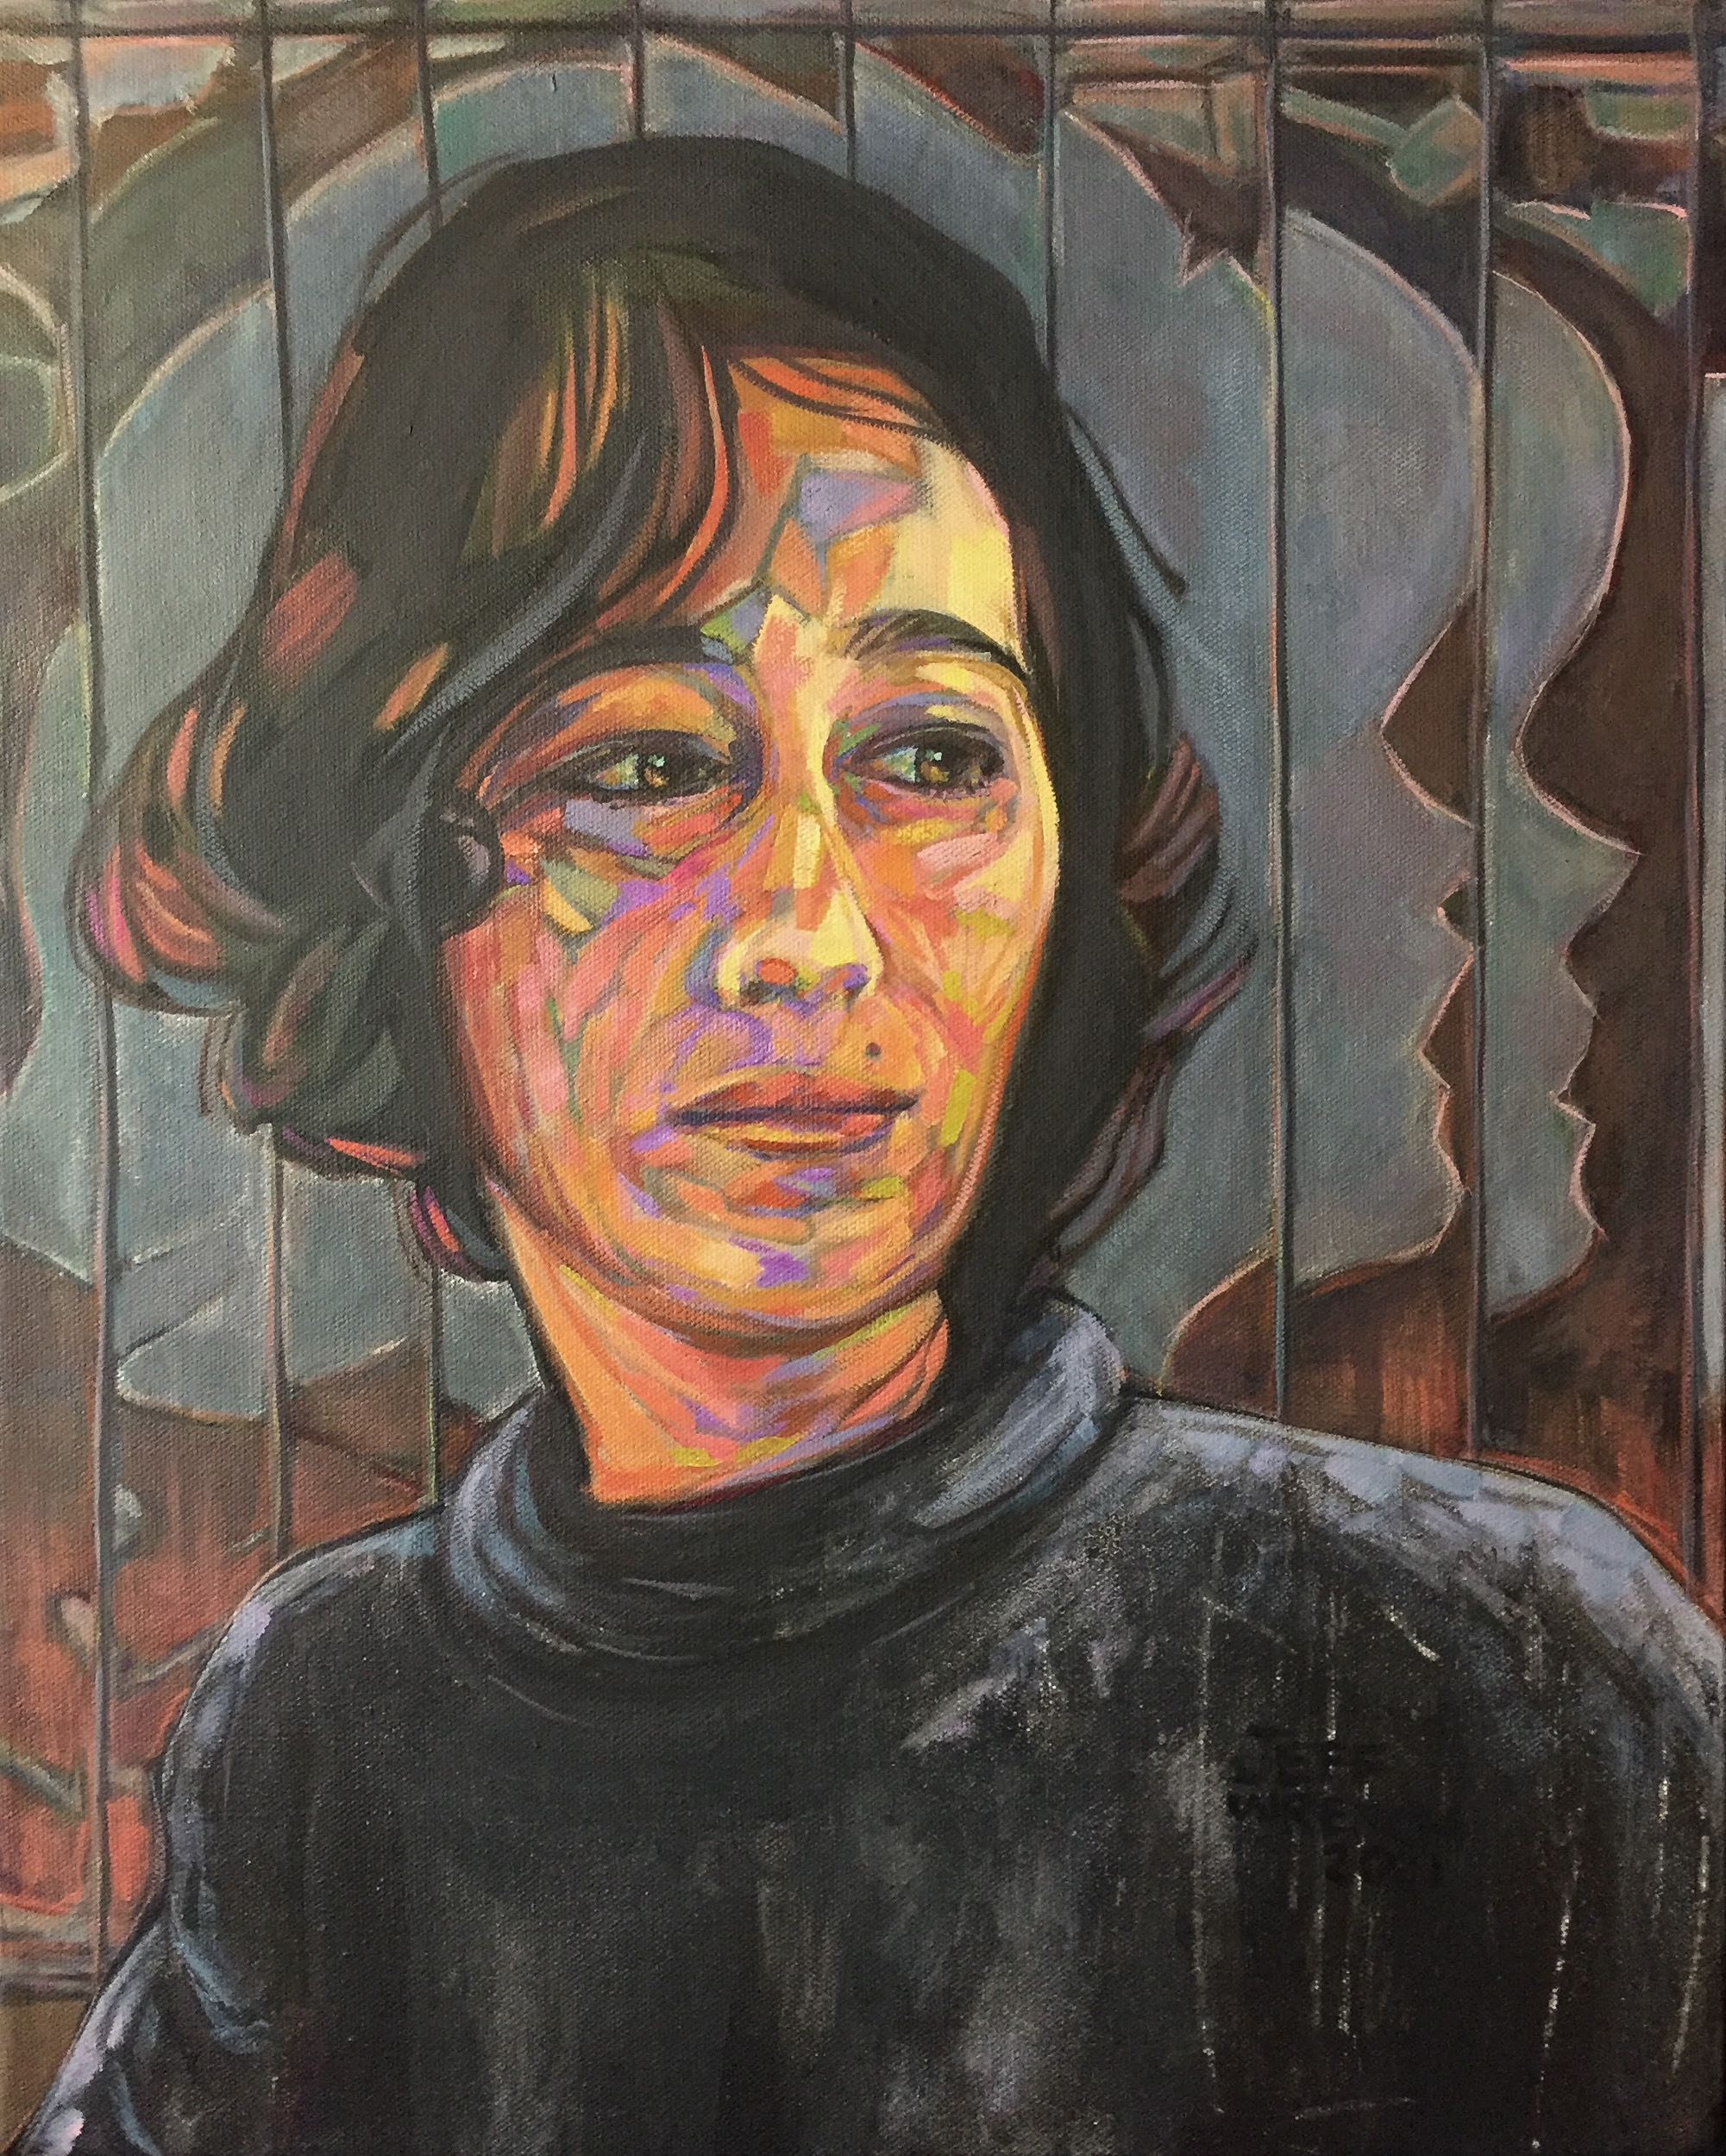 Giosetta Fiorini in 1965, acrylic on canvas by Jeff Wrench